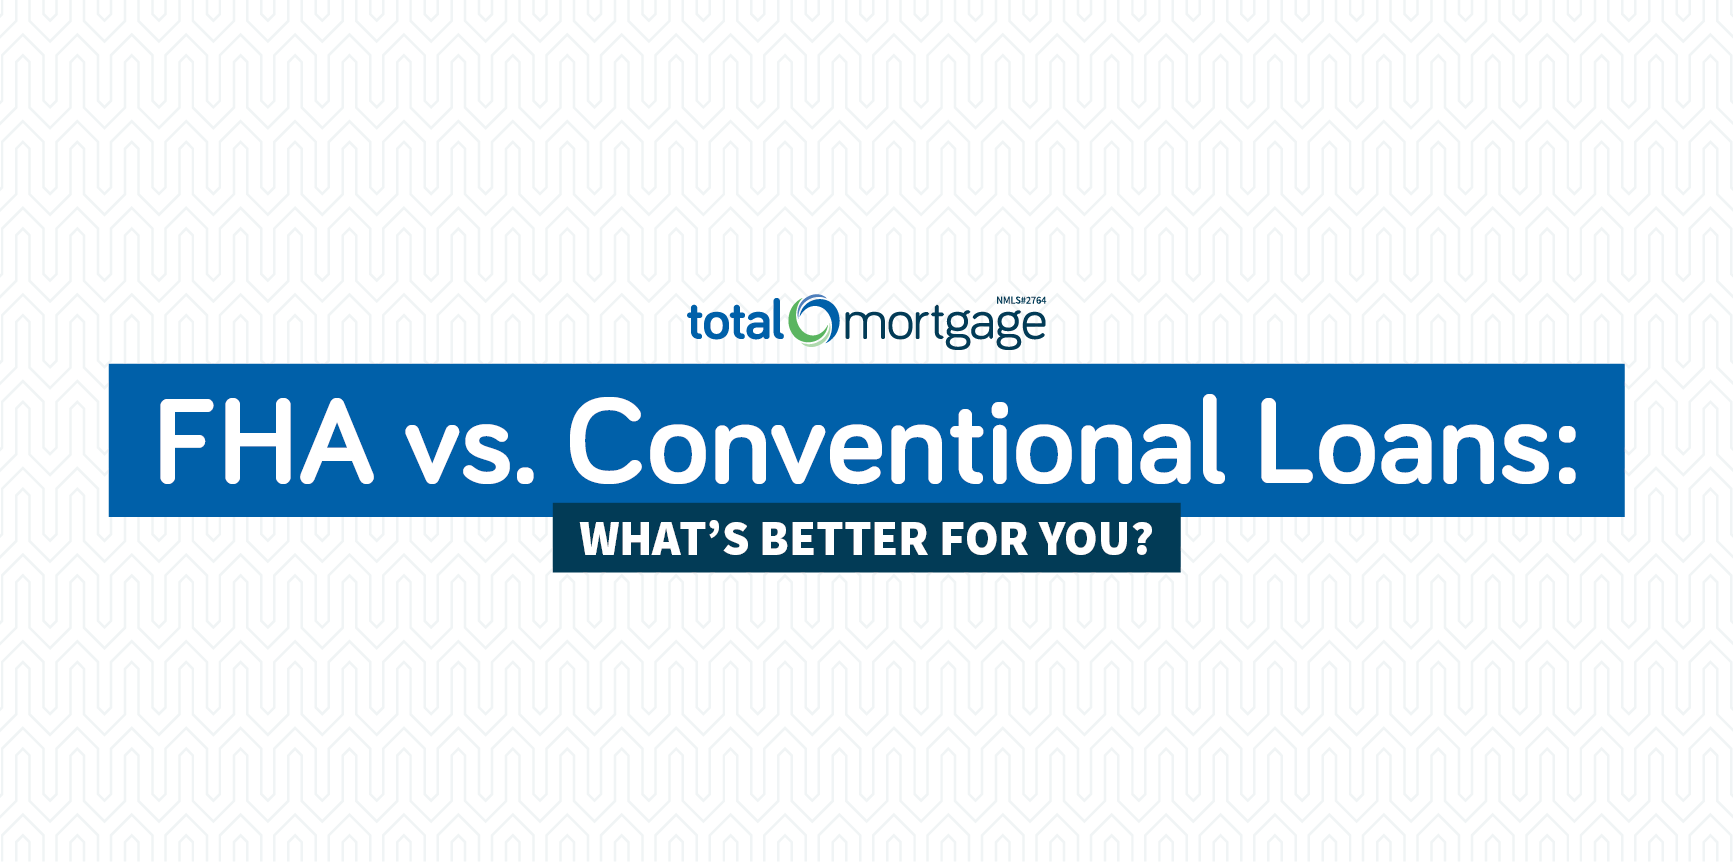 total mortgage, today's rates, personalized rates, in-depth analysis, all products, find your loan, all resources, total path guides, mortgage calculators, fha vs conventional loans comparison chart, 5 star reviews, conventional loan down payment